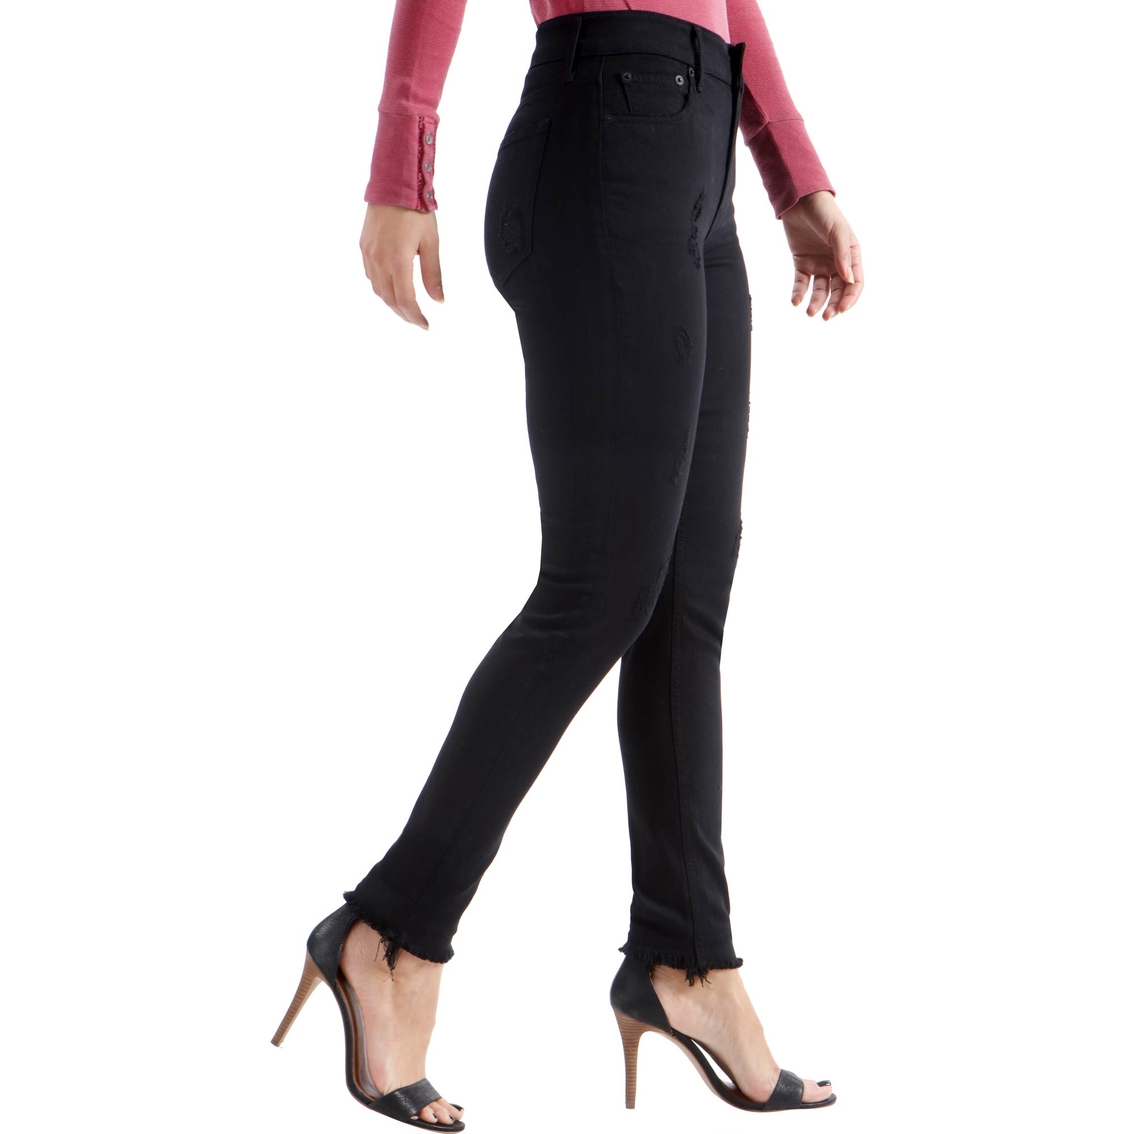 Lucky Brand Bridgette High Rise Skinny Jeans - Image 3 of 3